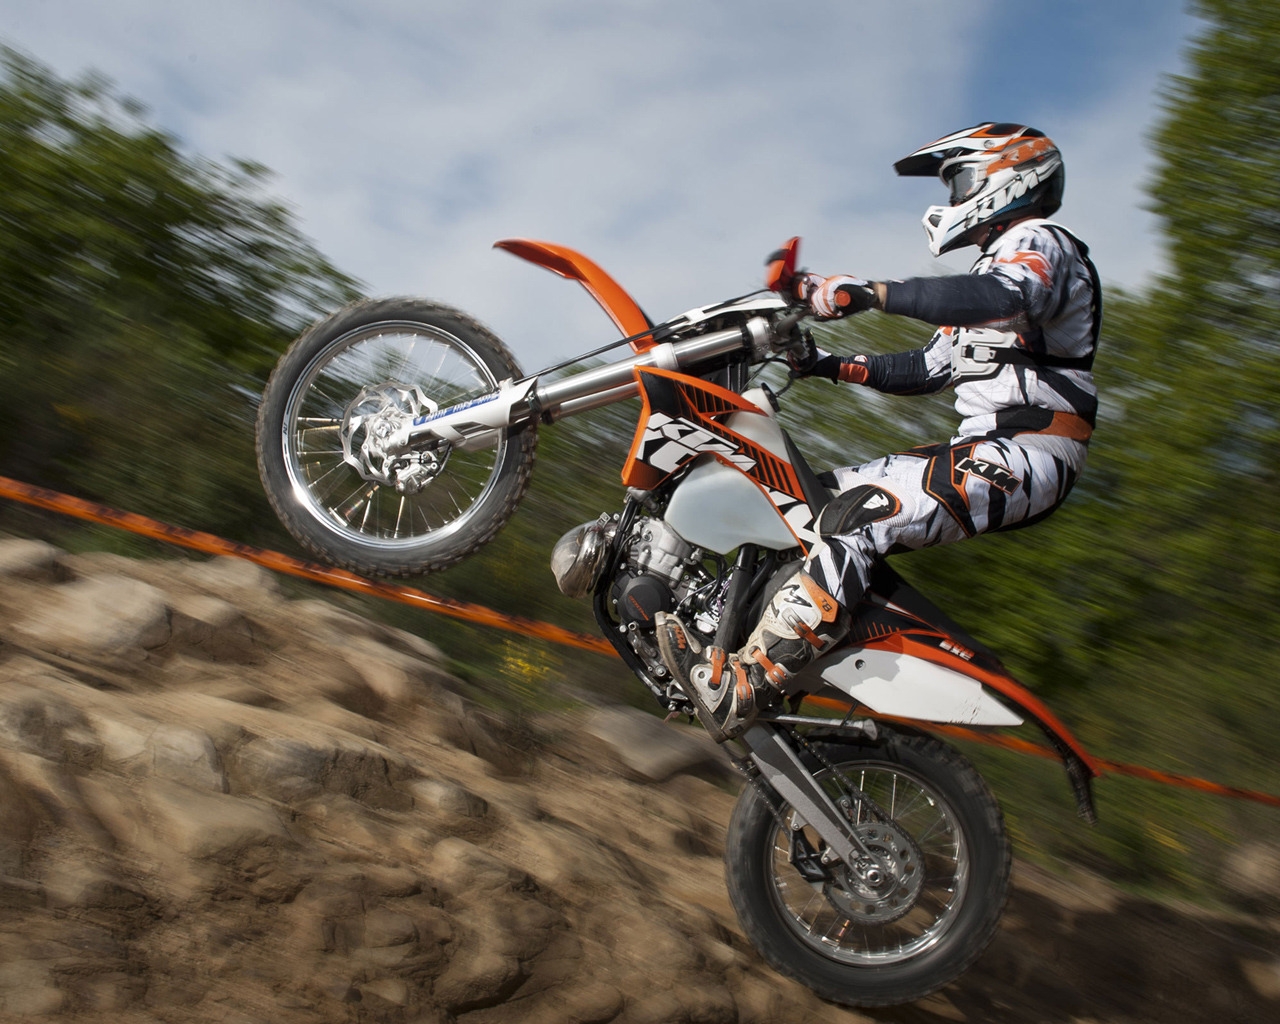 KTM EXC 200 2012 for 1280 x 1024 resolution